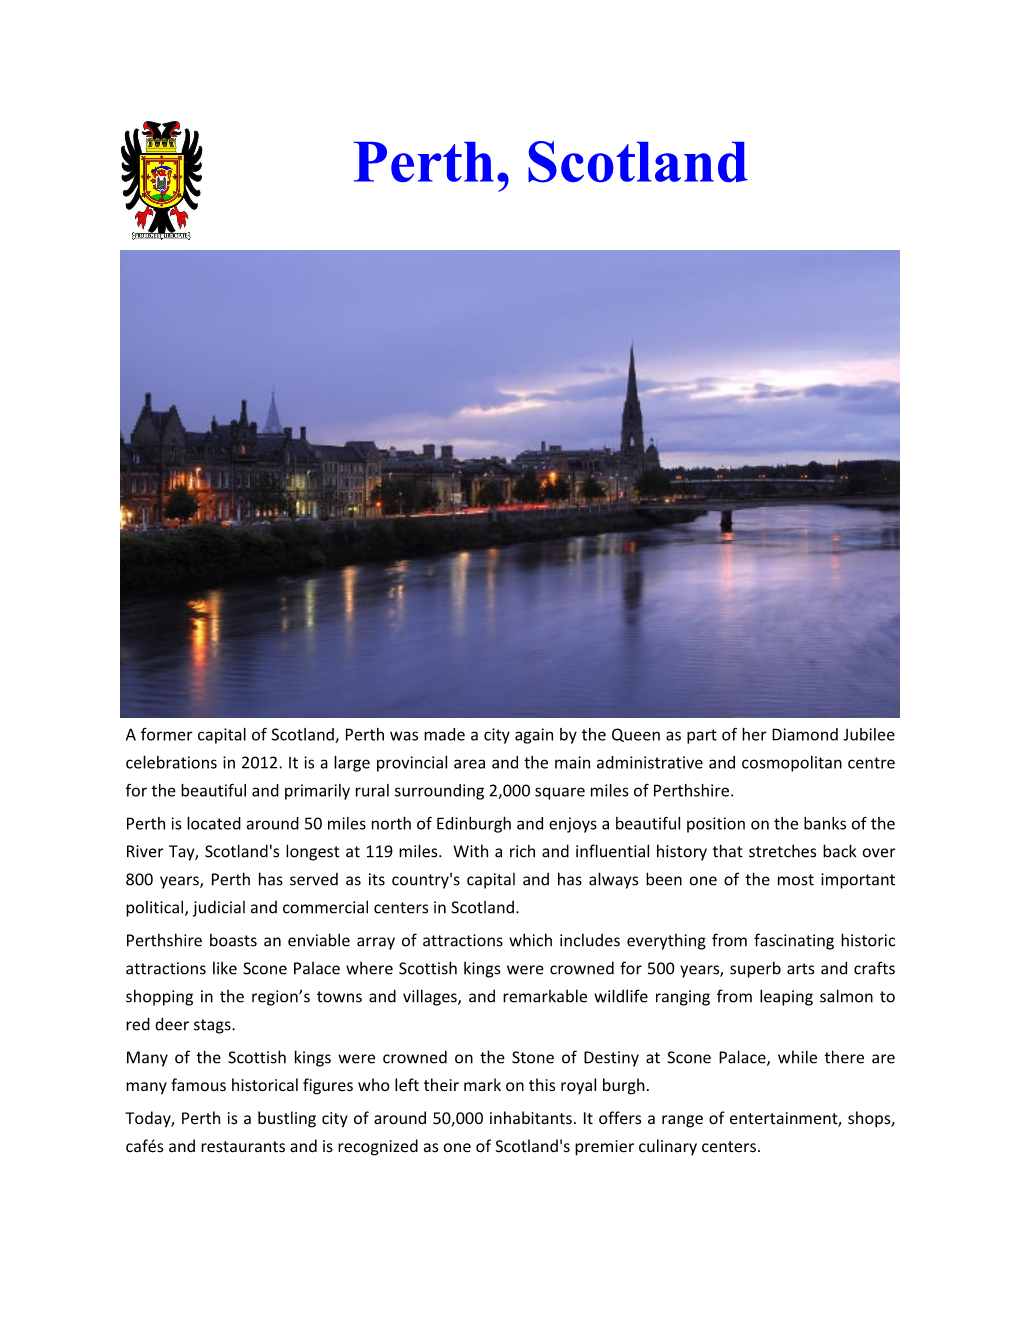 Scotland, Perth Was Made a City Again by the Queen As Part of Her Diamond Jubilee Celebrations in 2012